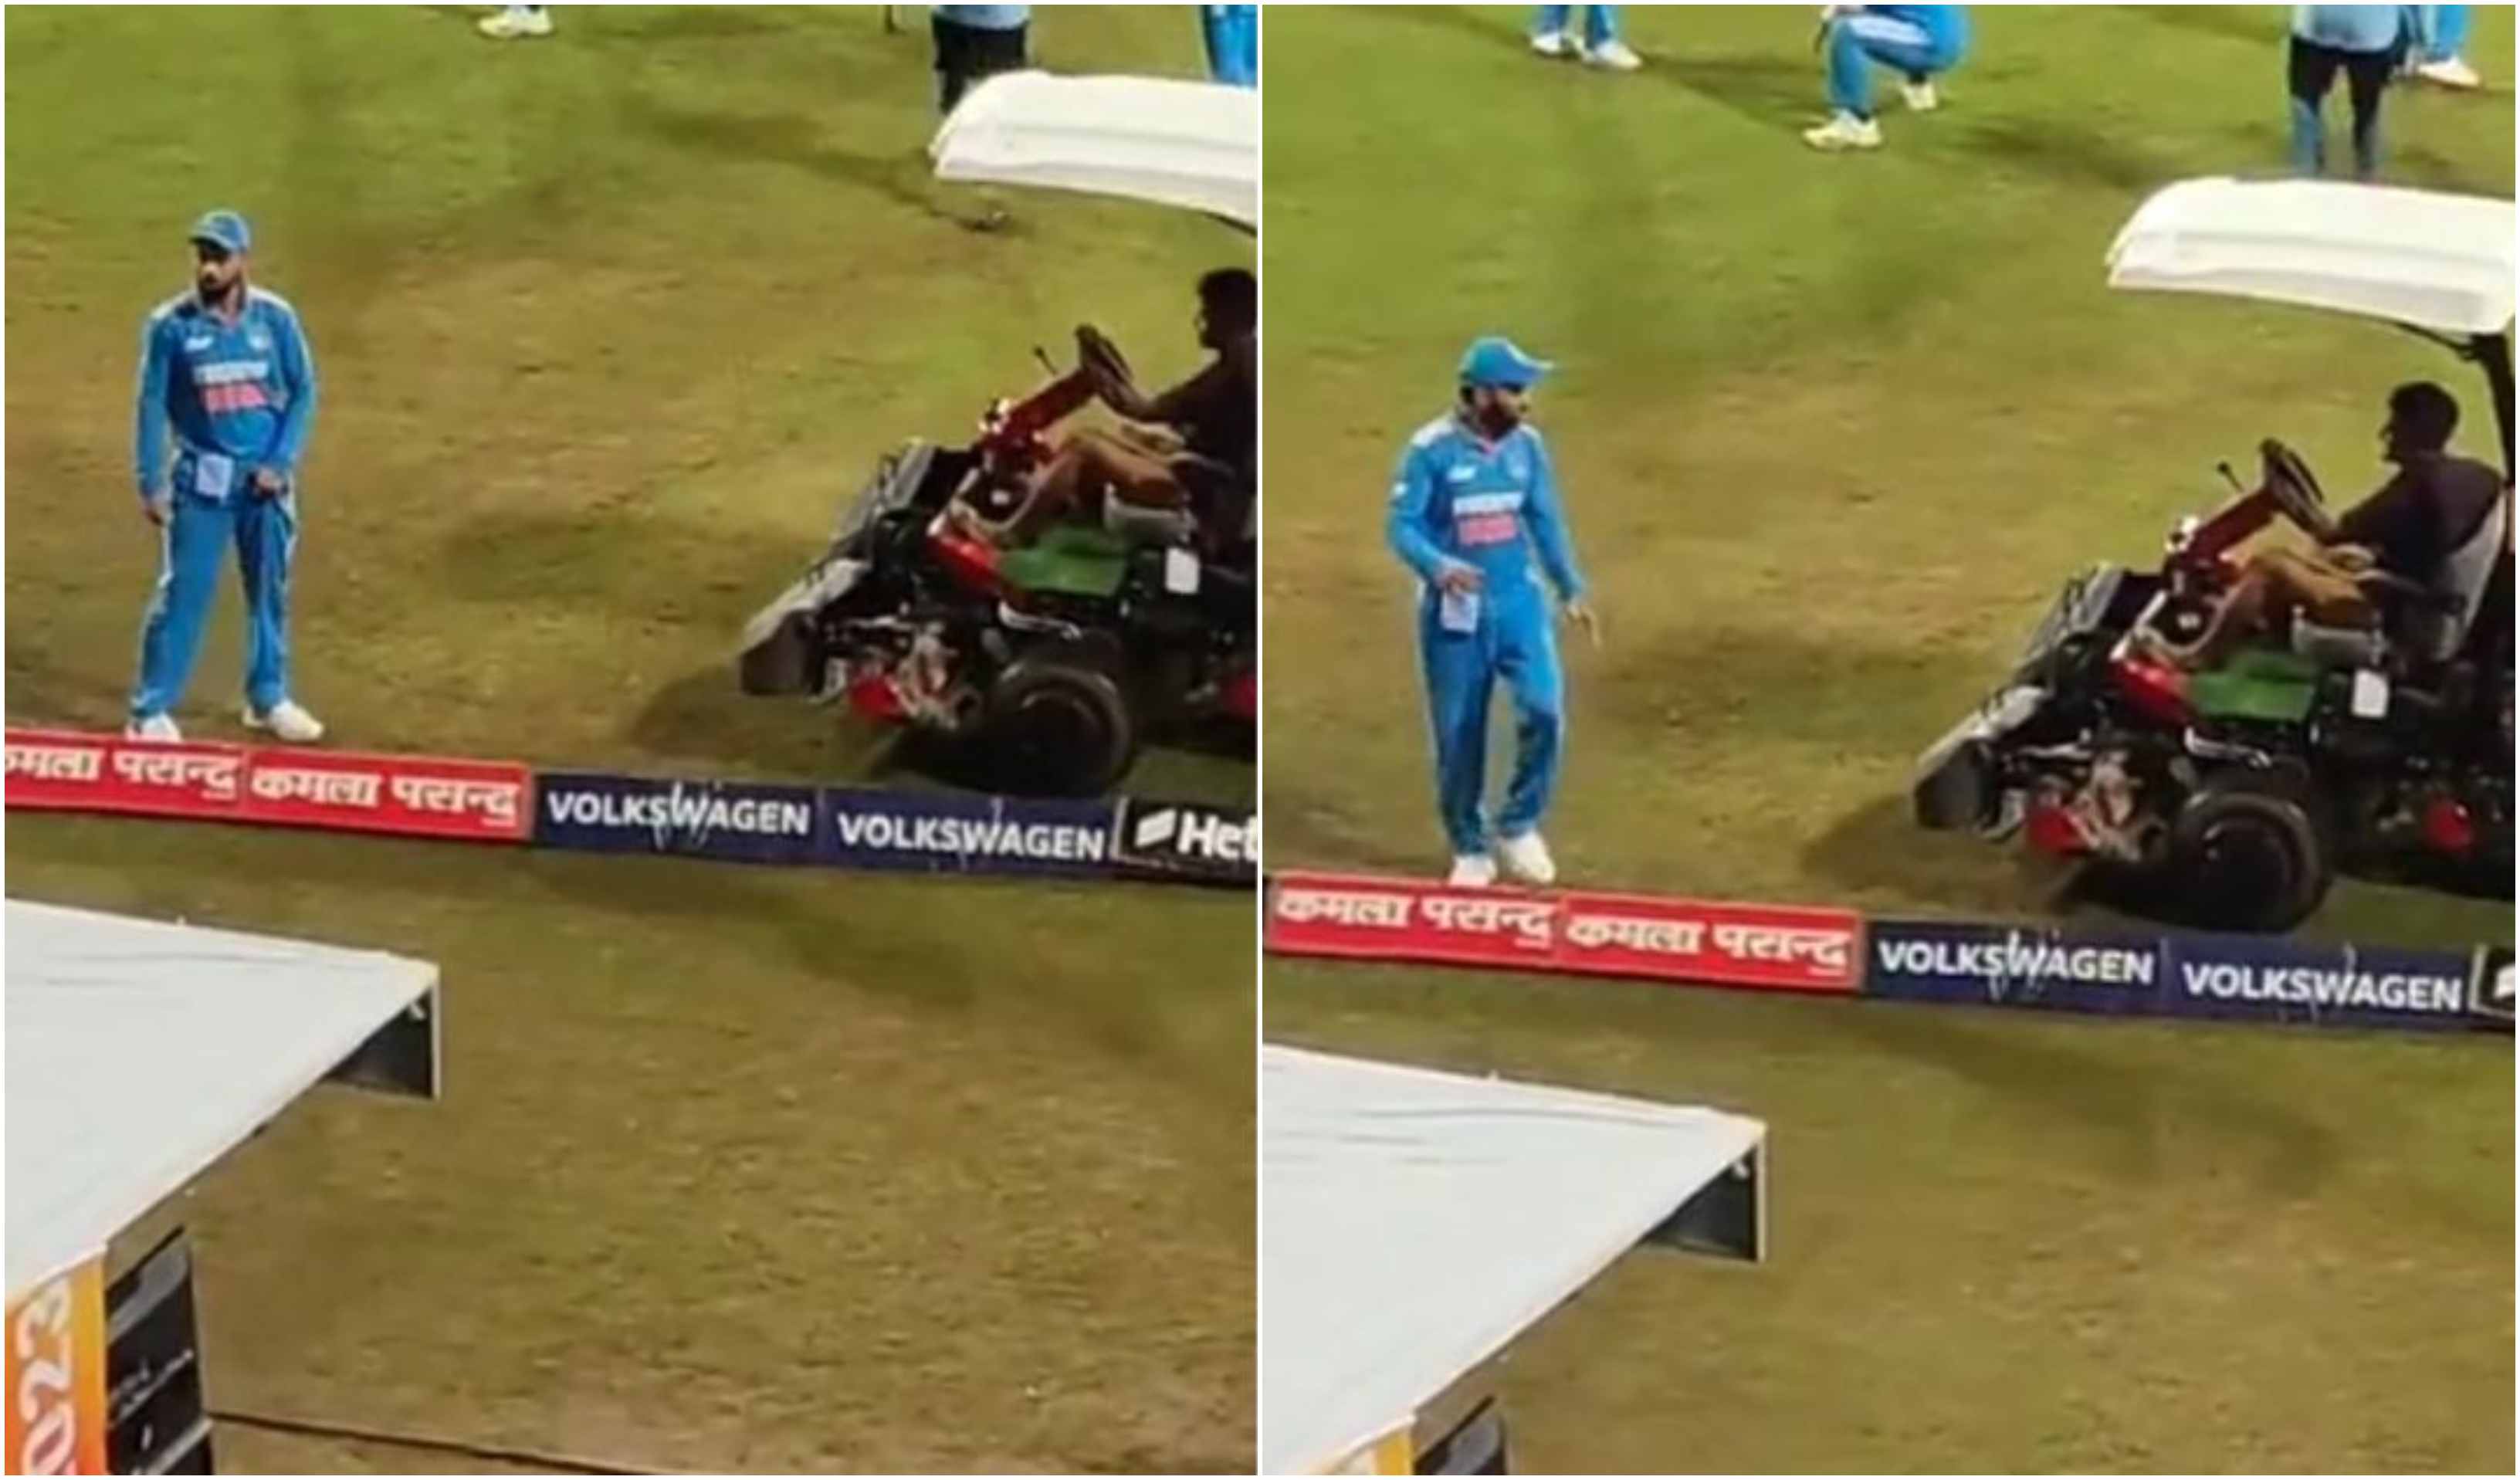 Virat Kohli was left scared by the antics from groundsman | Screengrab